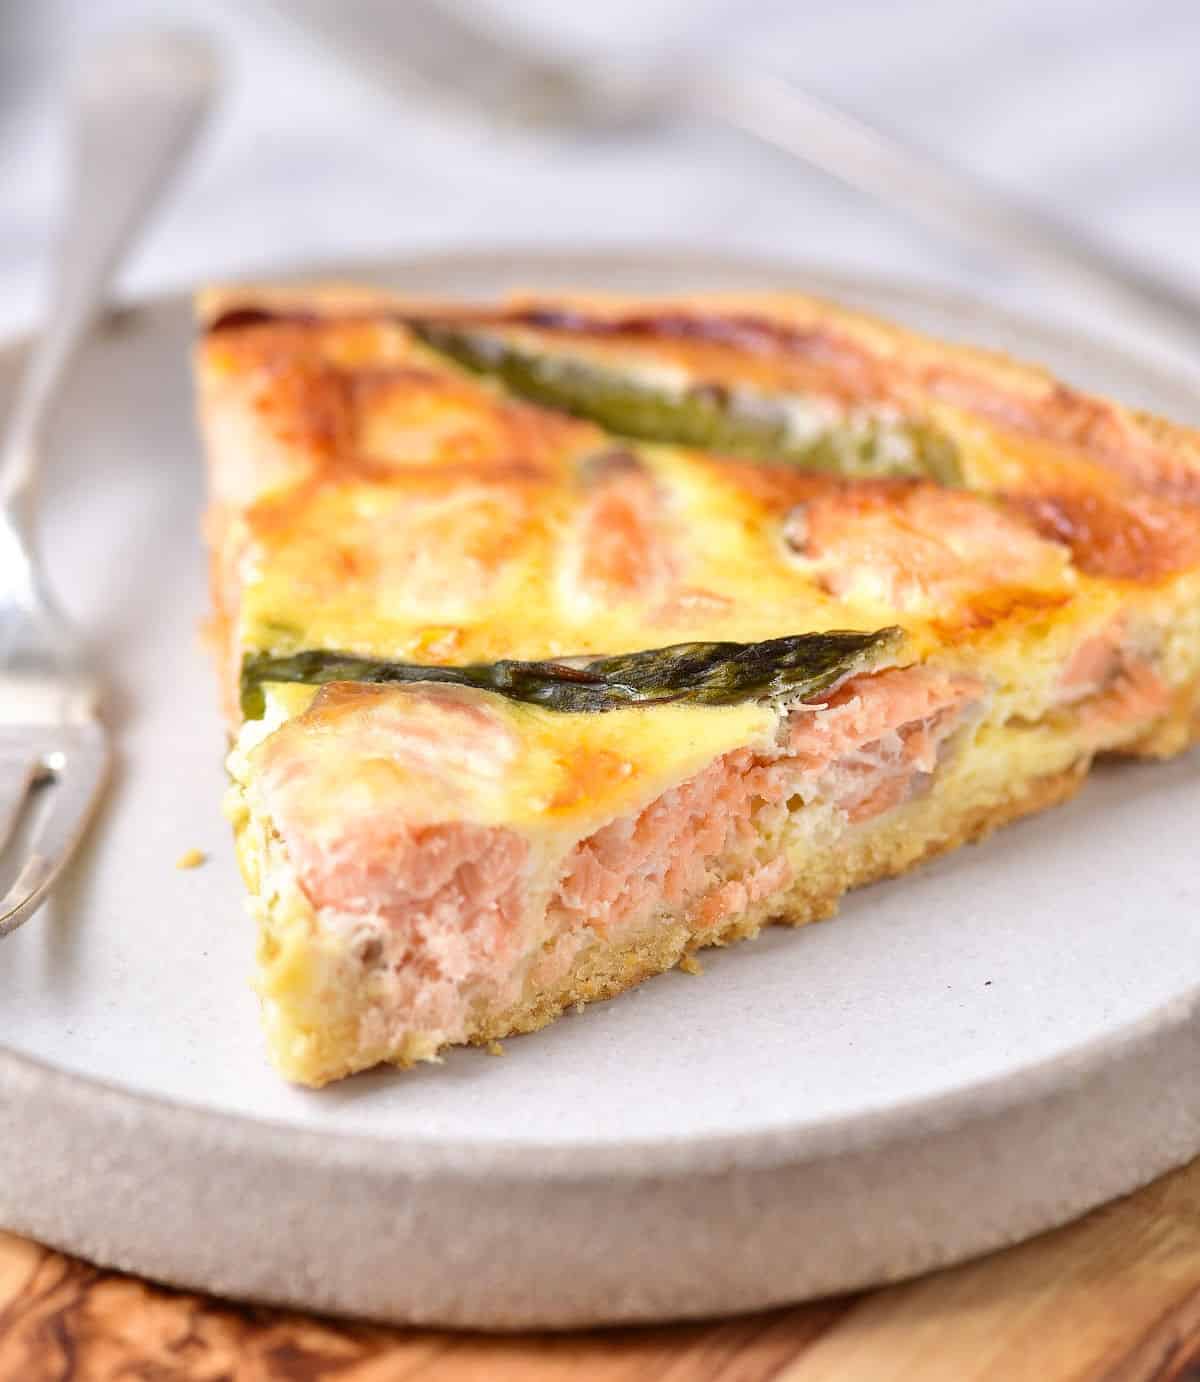 Close up view of salmon quiche slice on a grey plate with a silver fork.